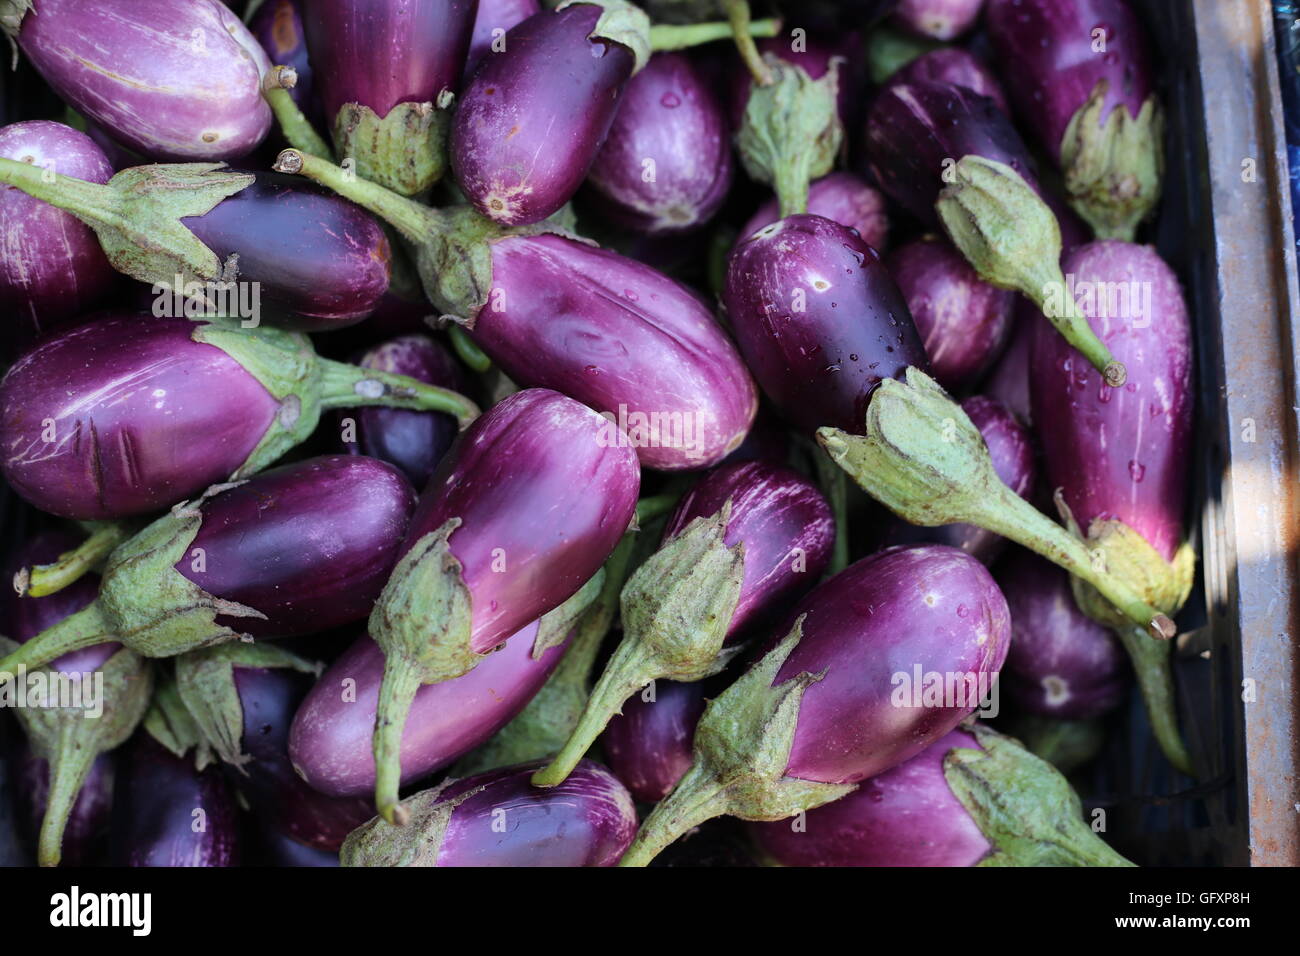 Eggplants. Stack of small fat eggplant in an impromptu market stand. Stock Photo